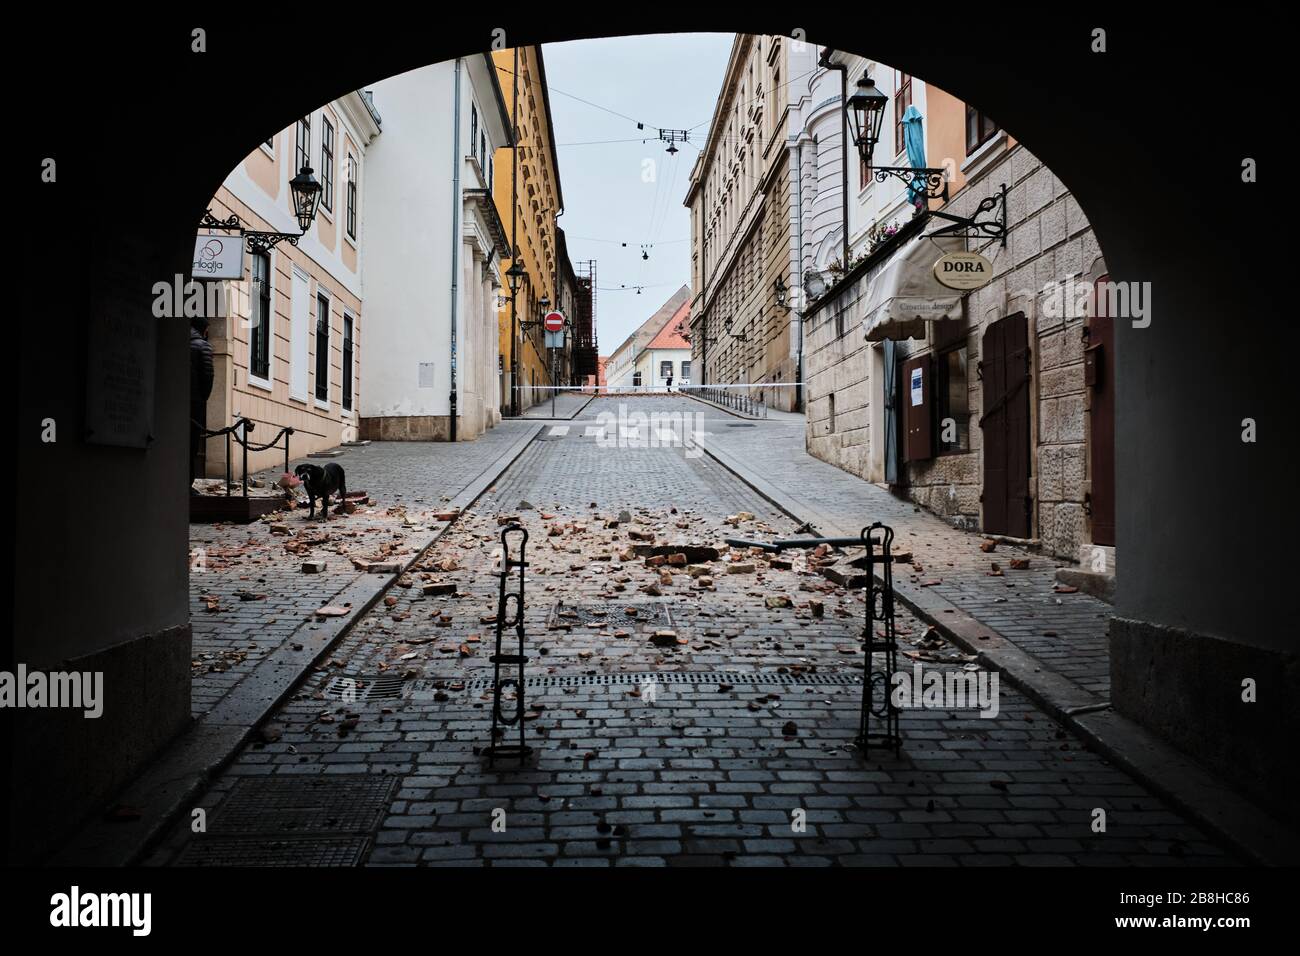 Amidst COVID 19 pandemic, the capital of Croatia, Zagreb got struck by 5.5 magnitude earthquake on 22.3.2020. Several people got injured one severely. Stock Photo